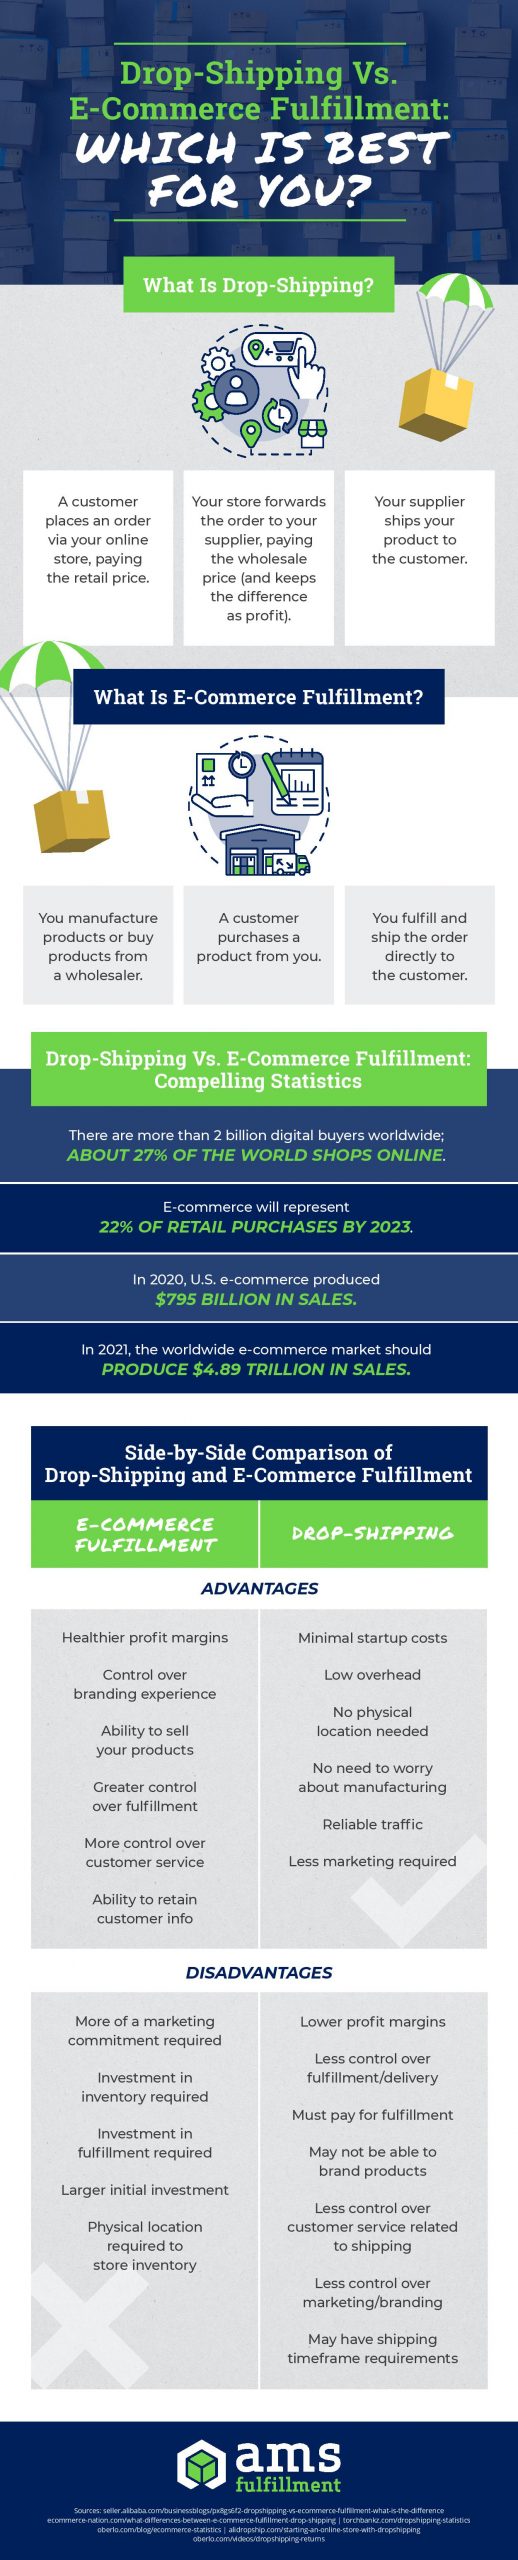 AMS Fulfillment Drop Shipping Vs. Ecommerce Fulfillment Page 001 Scaled, Industry Today